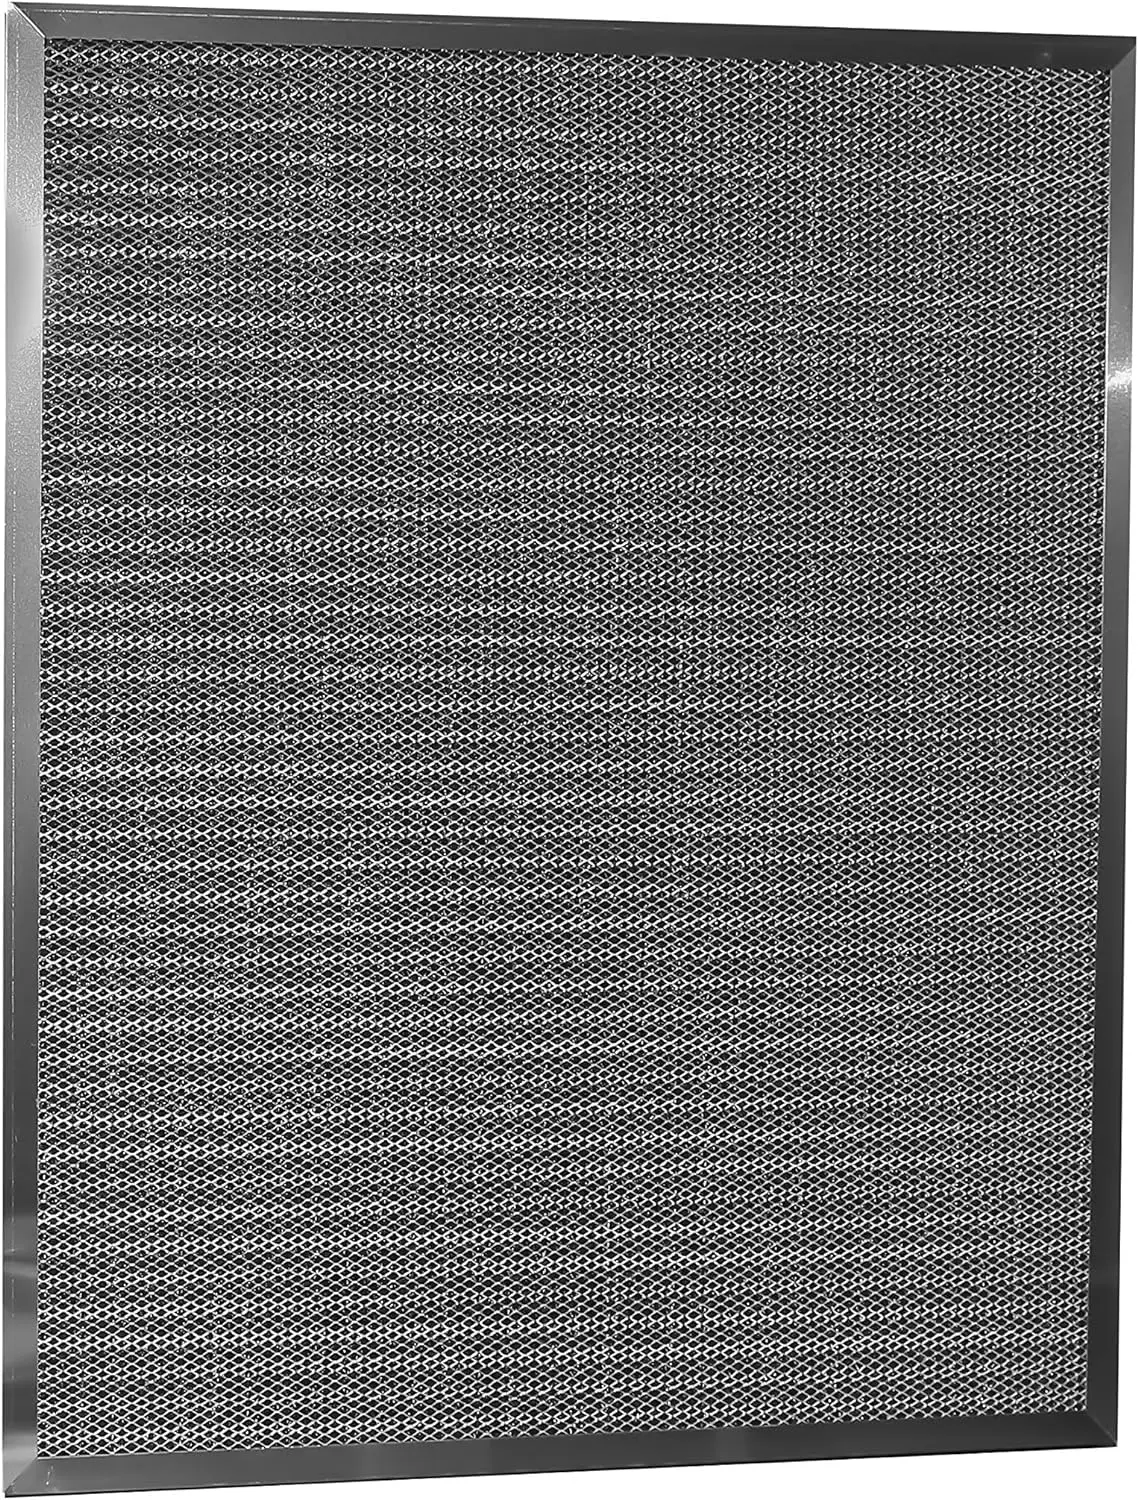 

Aluminum Electrostatic Air Filter Replacement Washable Reusable AC Filter for Central HVAC Furnace by